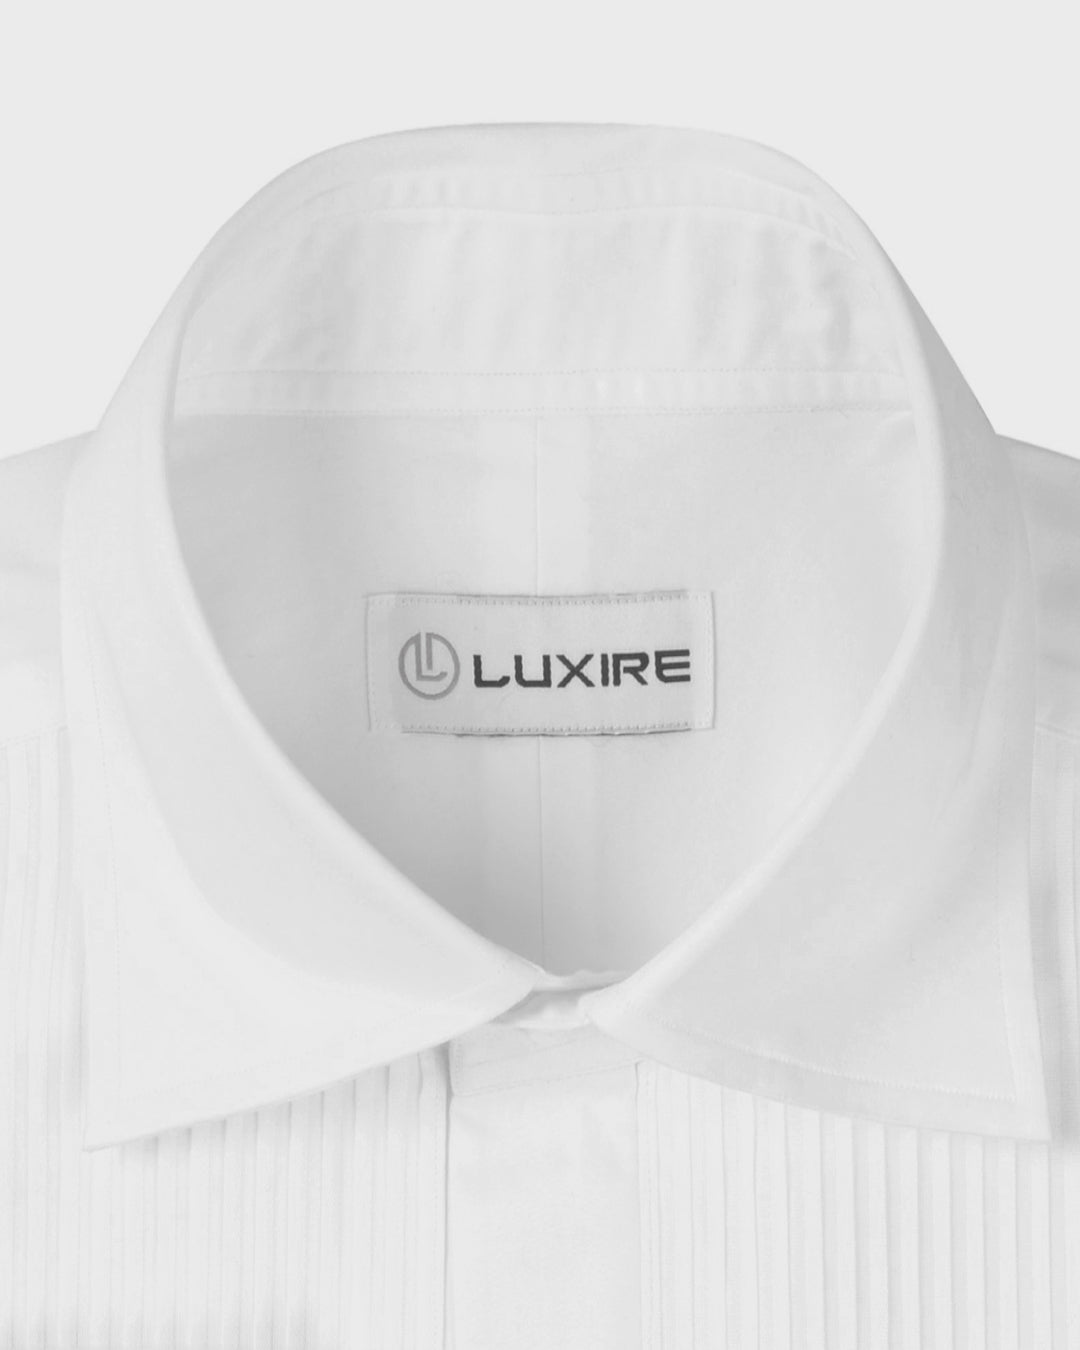 Collar of the mens tuxedo shirt by Luxire called classic